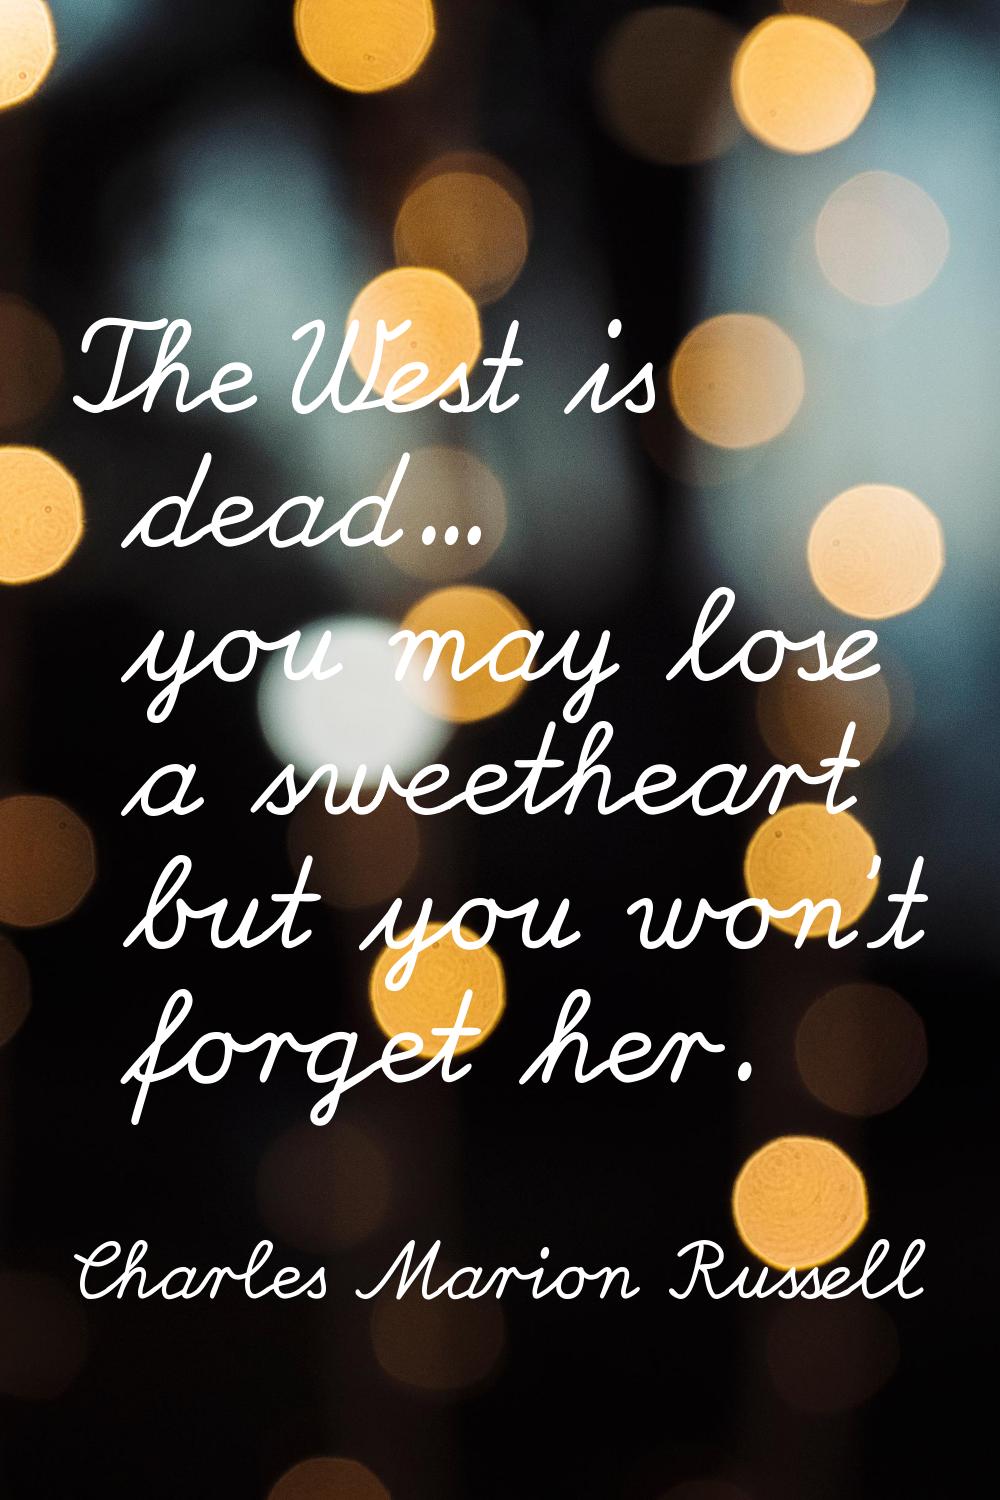 The West is dead... you may lose a sweetheart but you won't forget her.